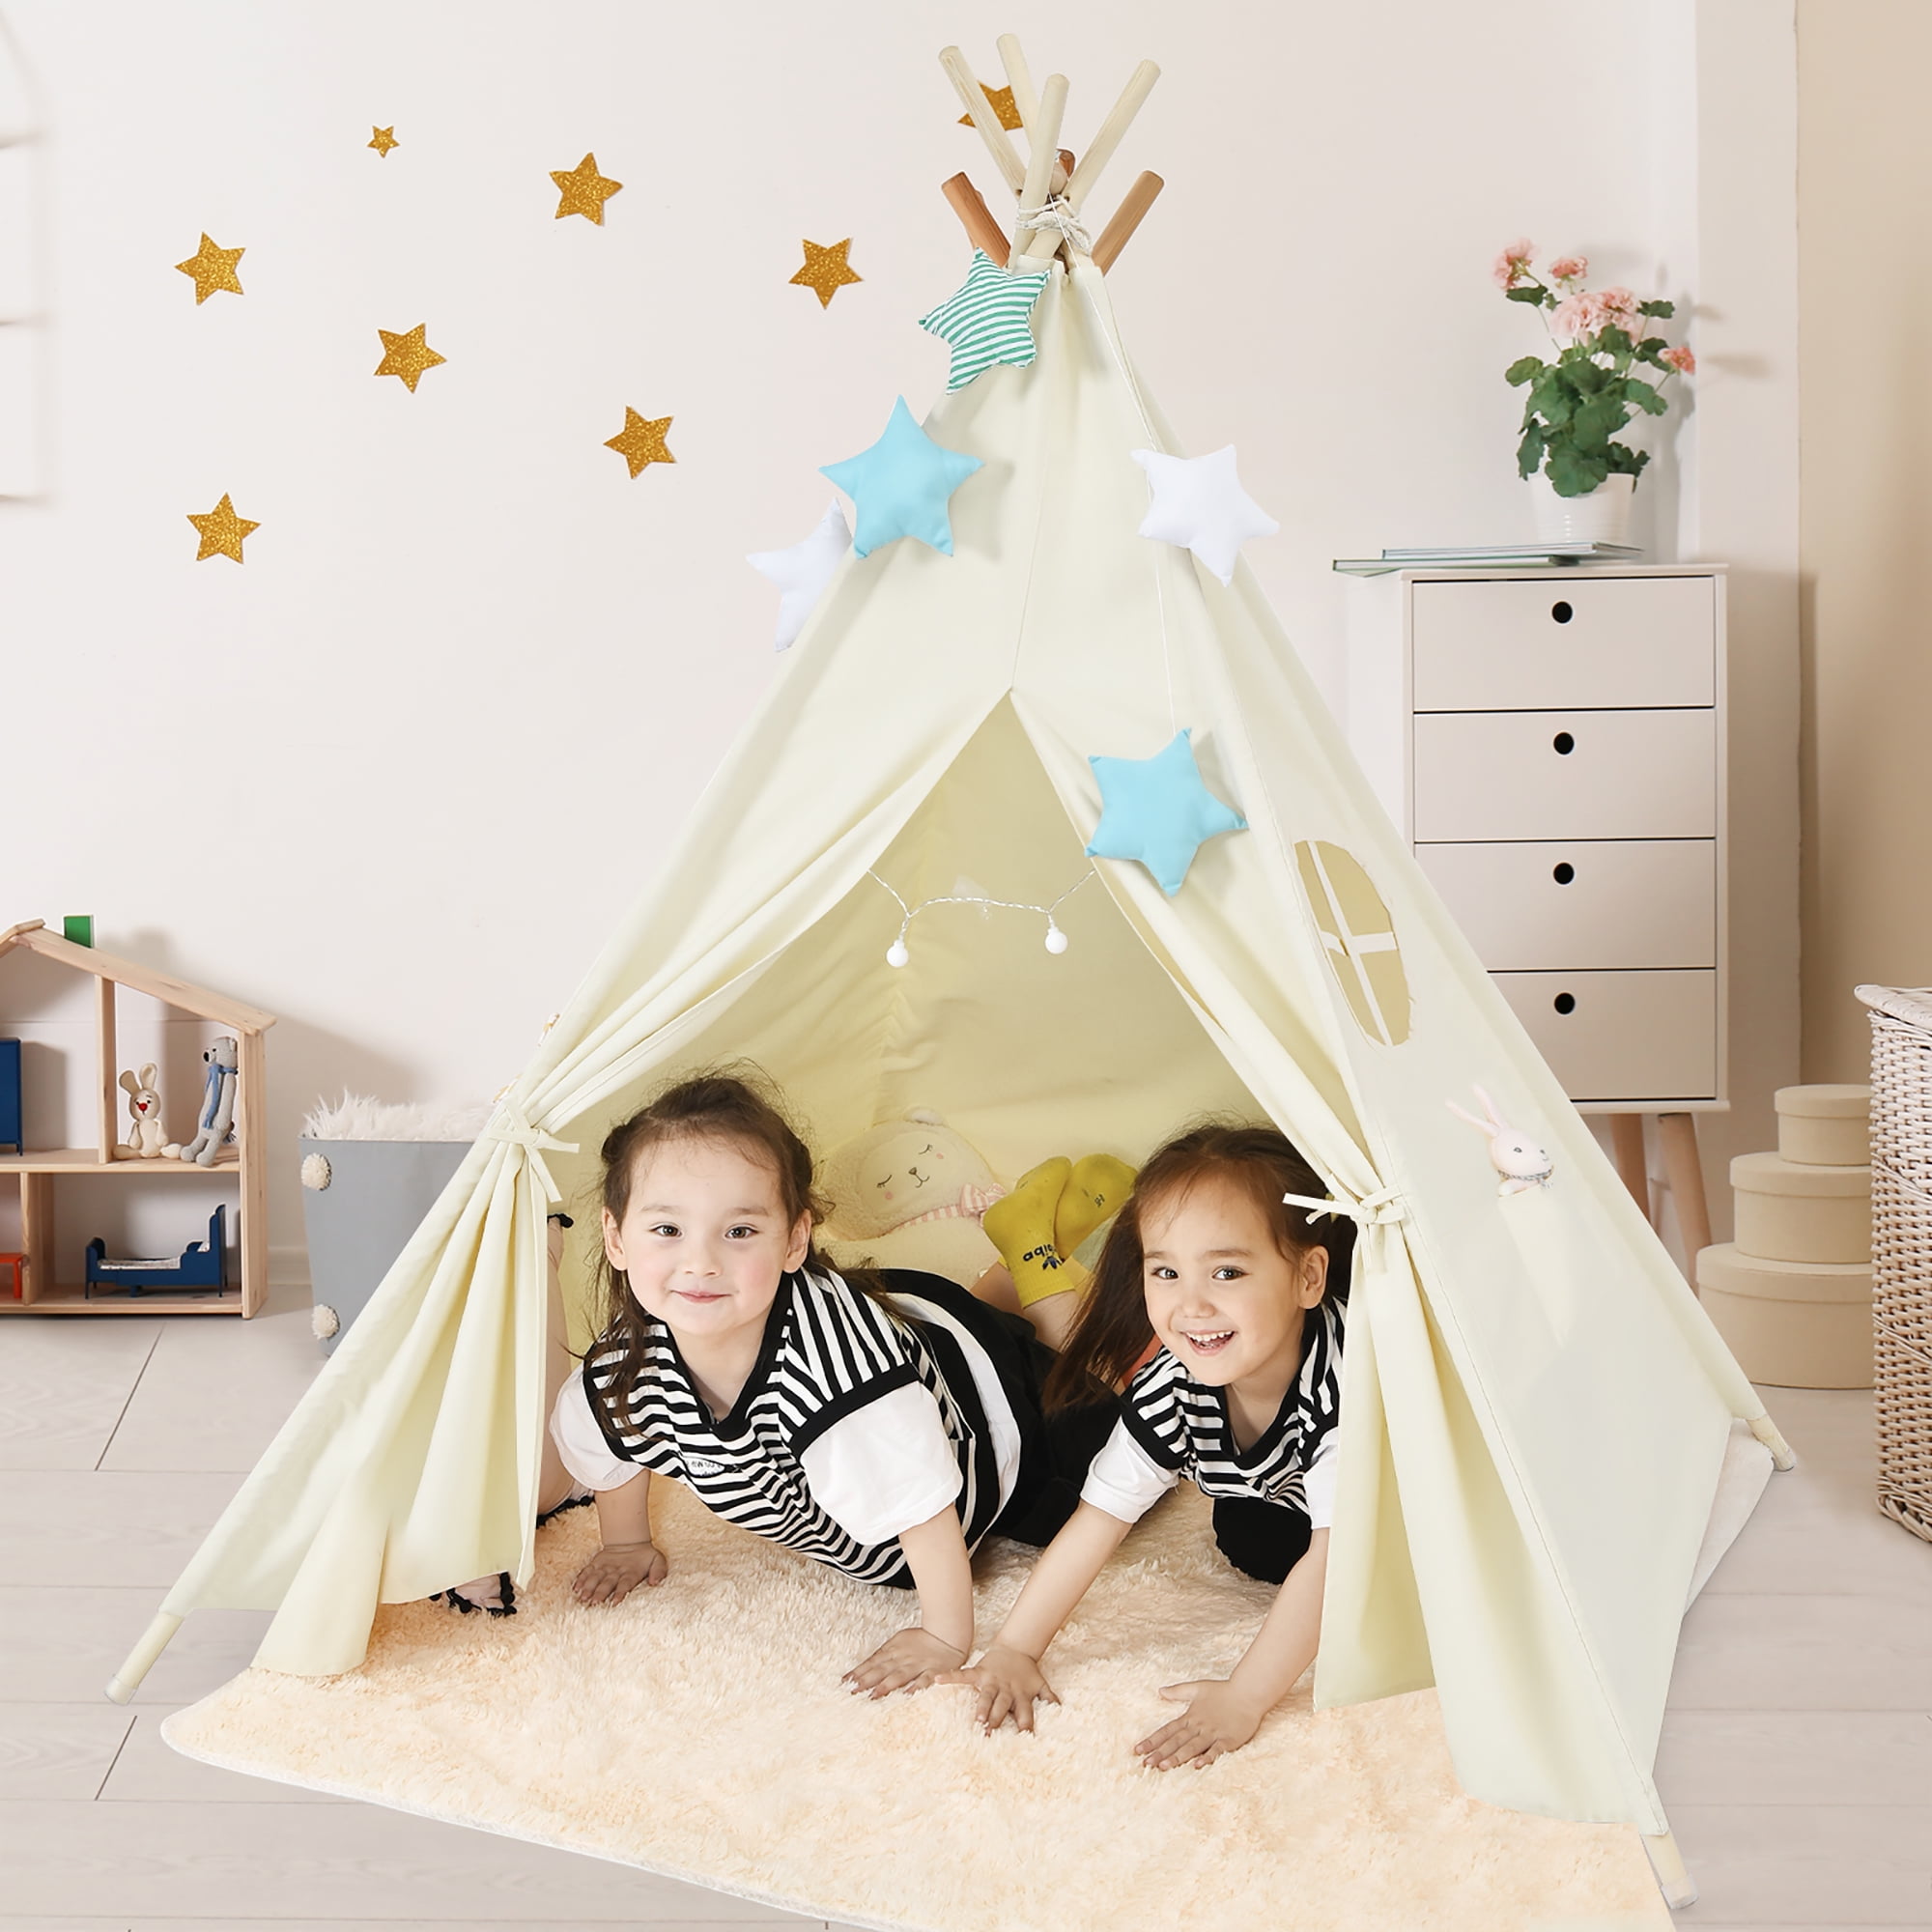 Birthday Gifts for Kids Kids Play Tent Space Teepee for Girls Boys Indoor and Outdoor Games for Family Fun 